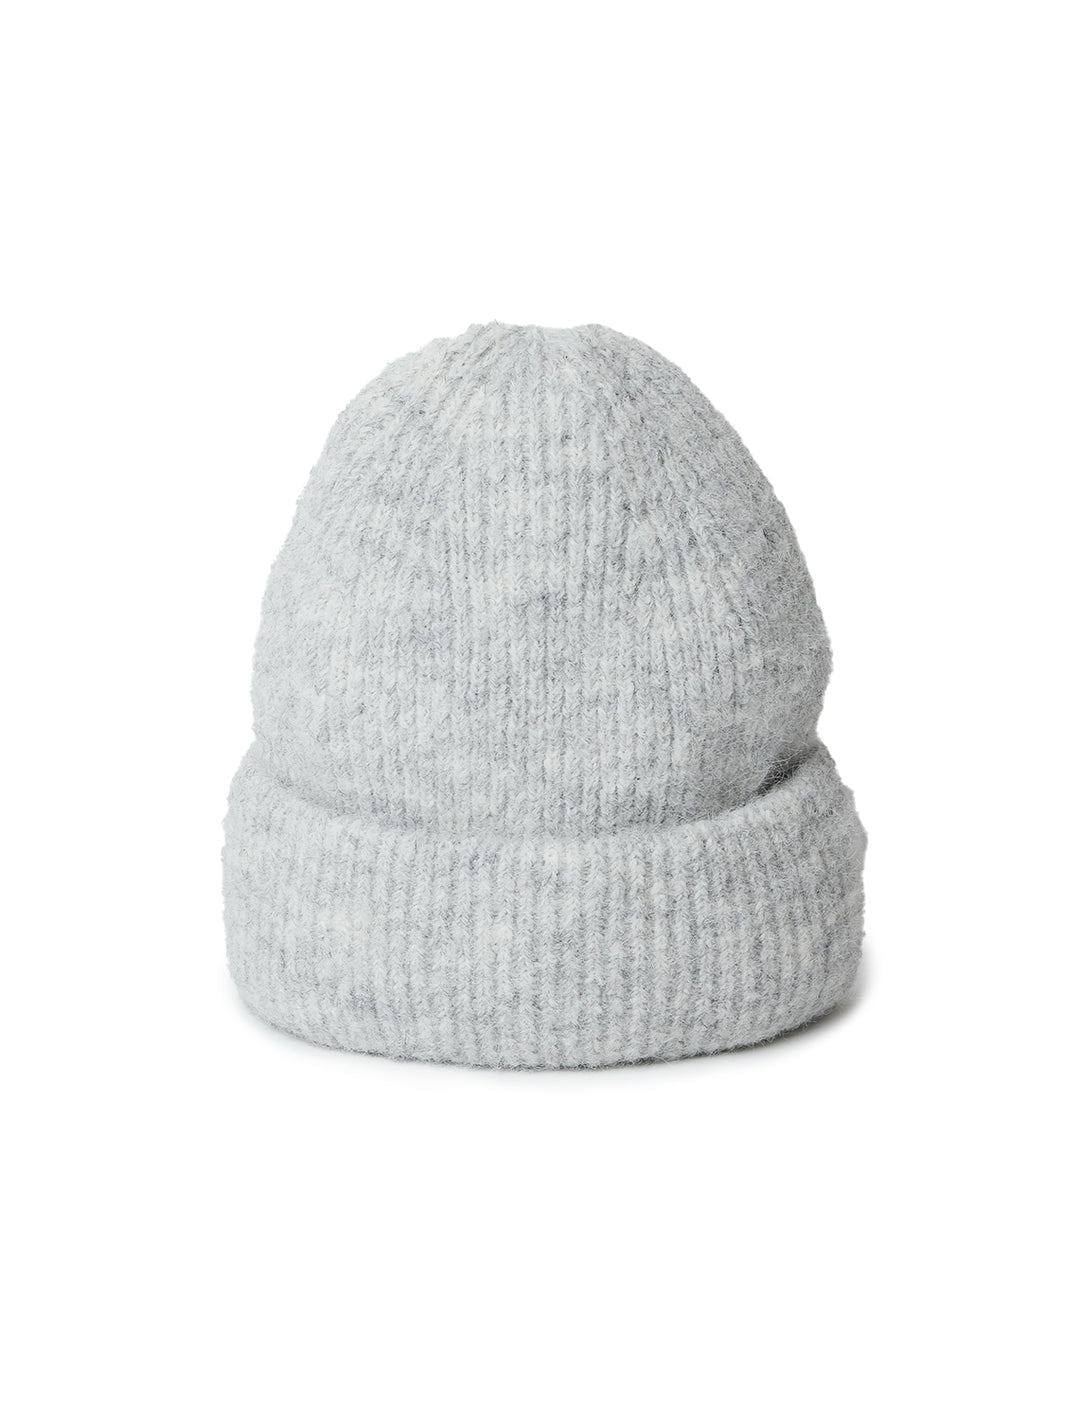 Front view of Hat Attack's eco cuff beanie in light grey.